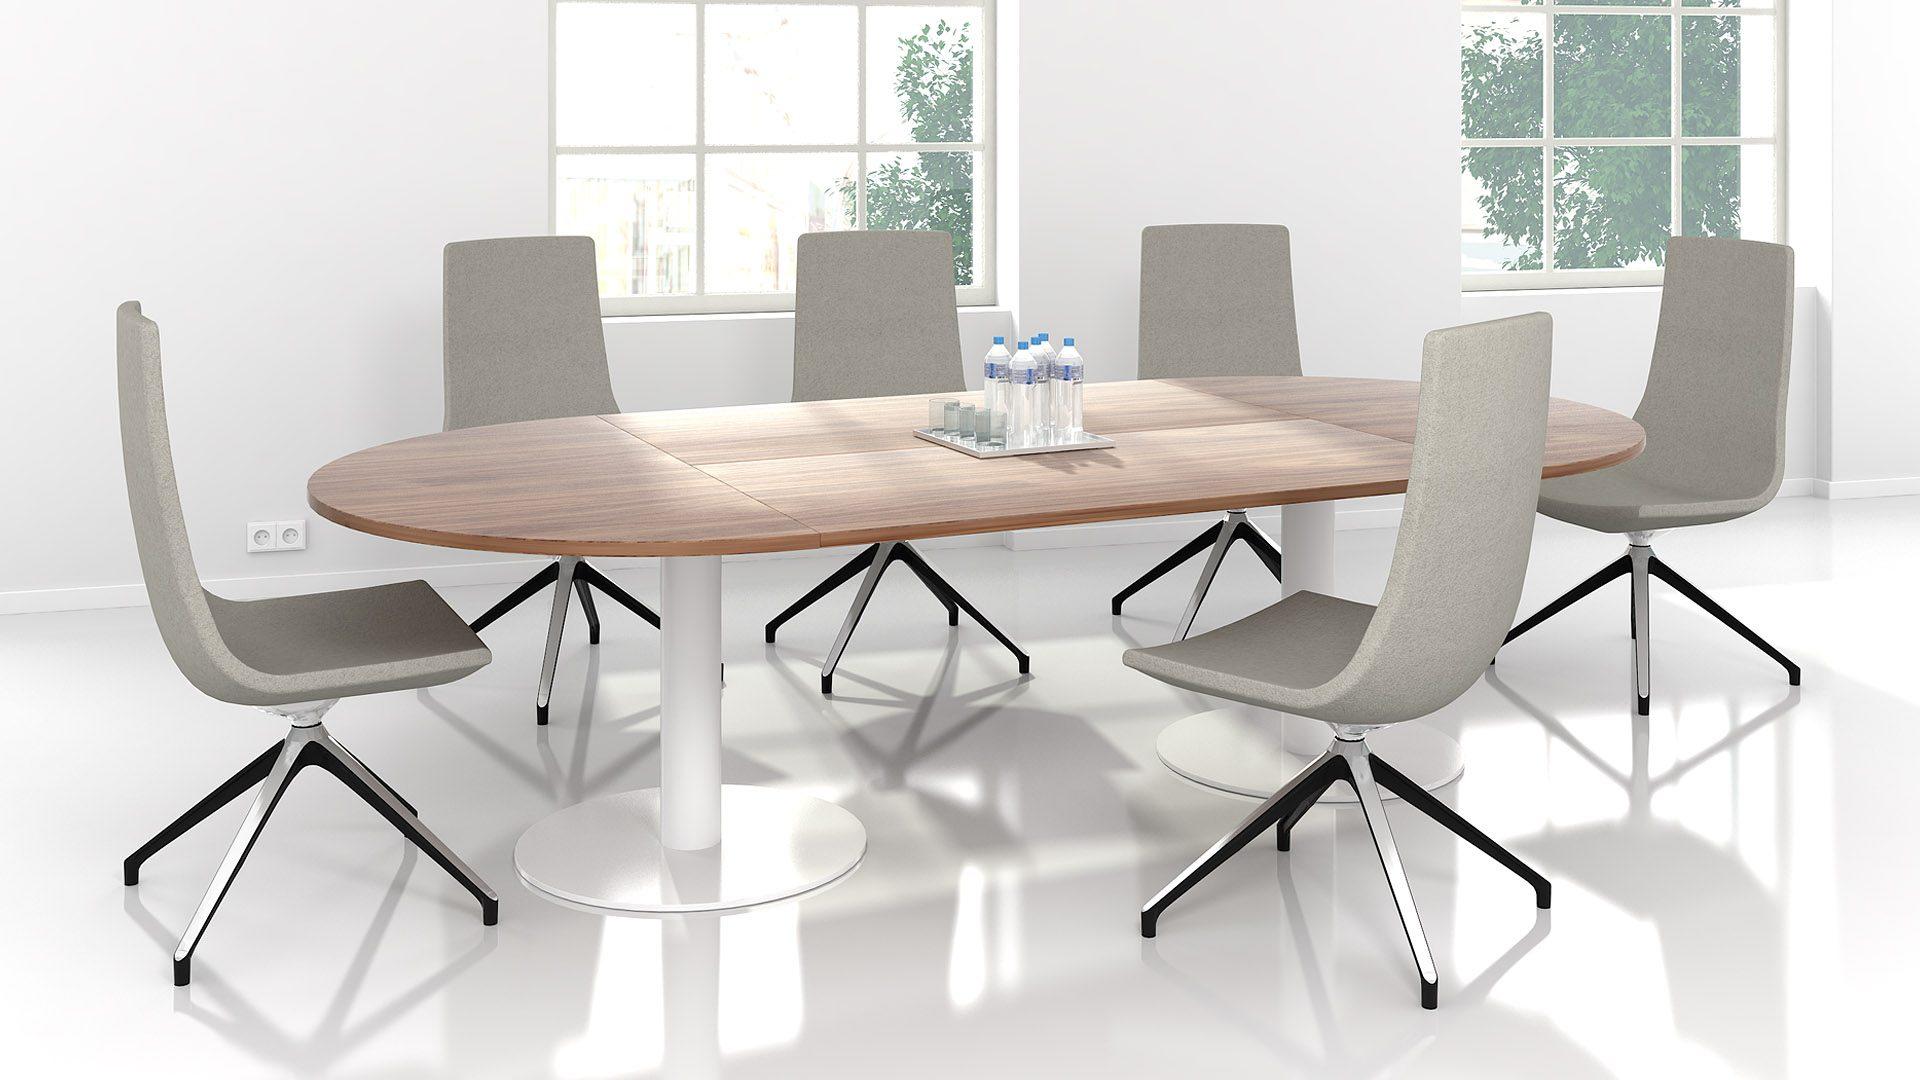 Forum Rounded End Meeting table, 1.4m wide and 2.8m long with white bases